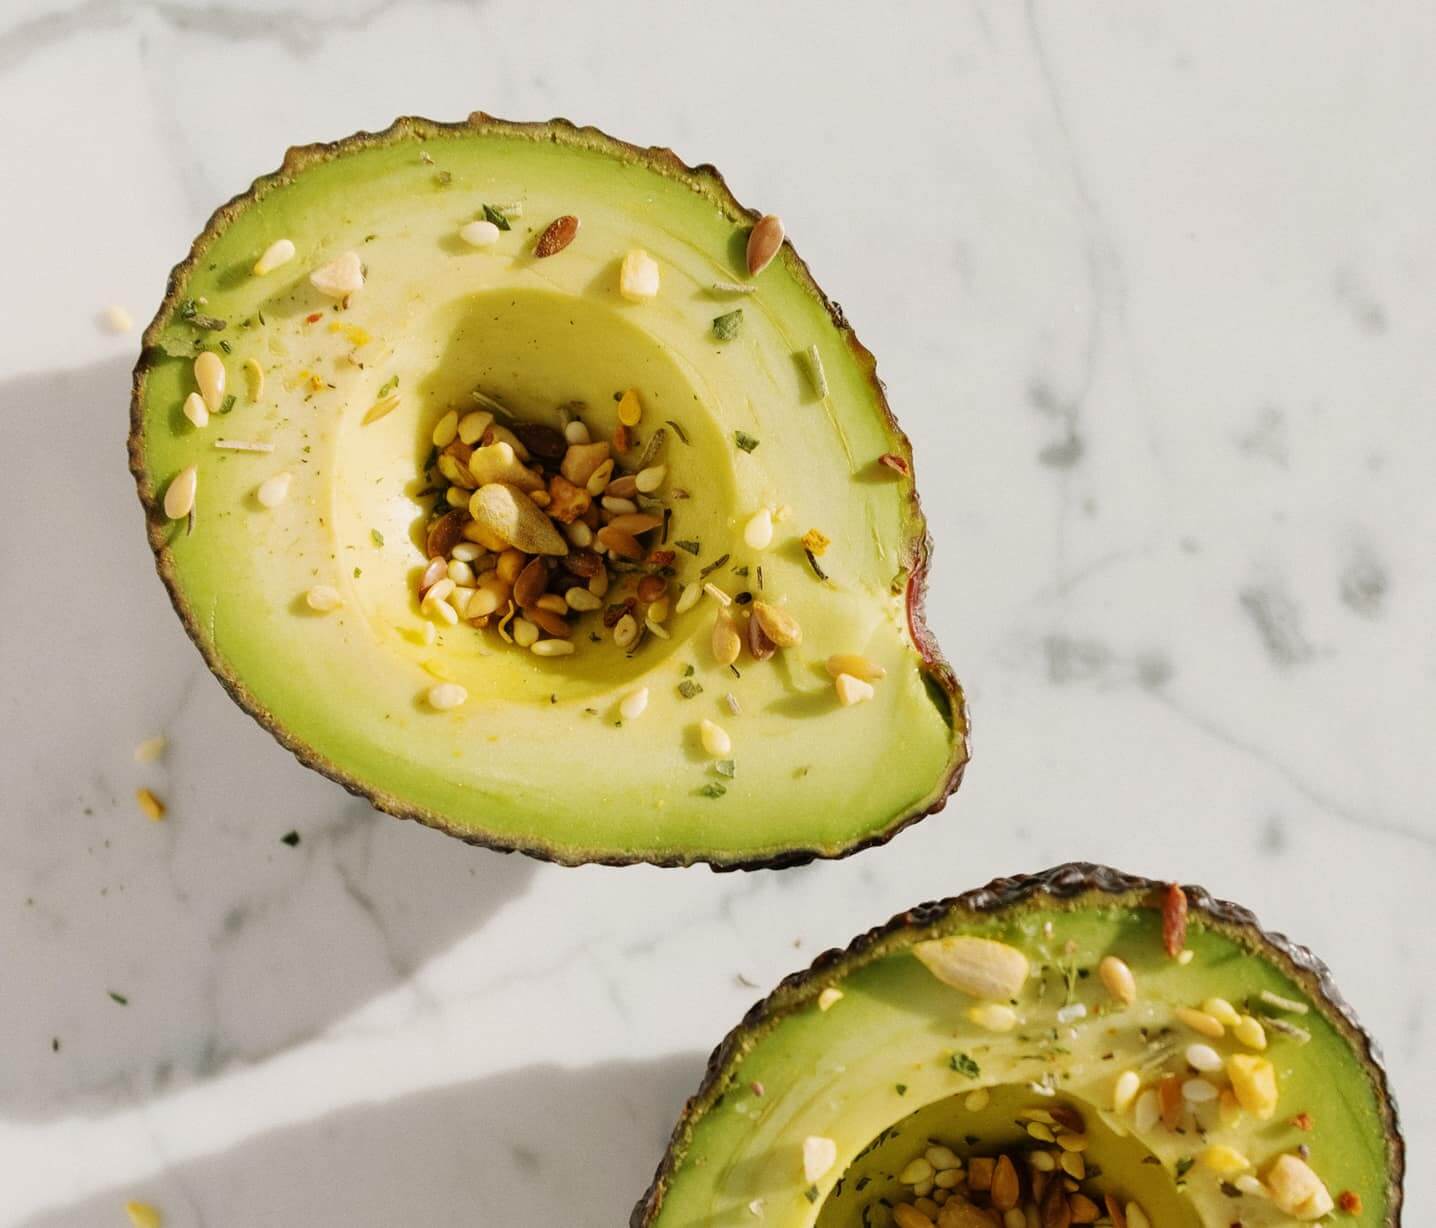 Avocado mit greenist Omega 3 Mix Topping